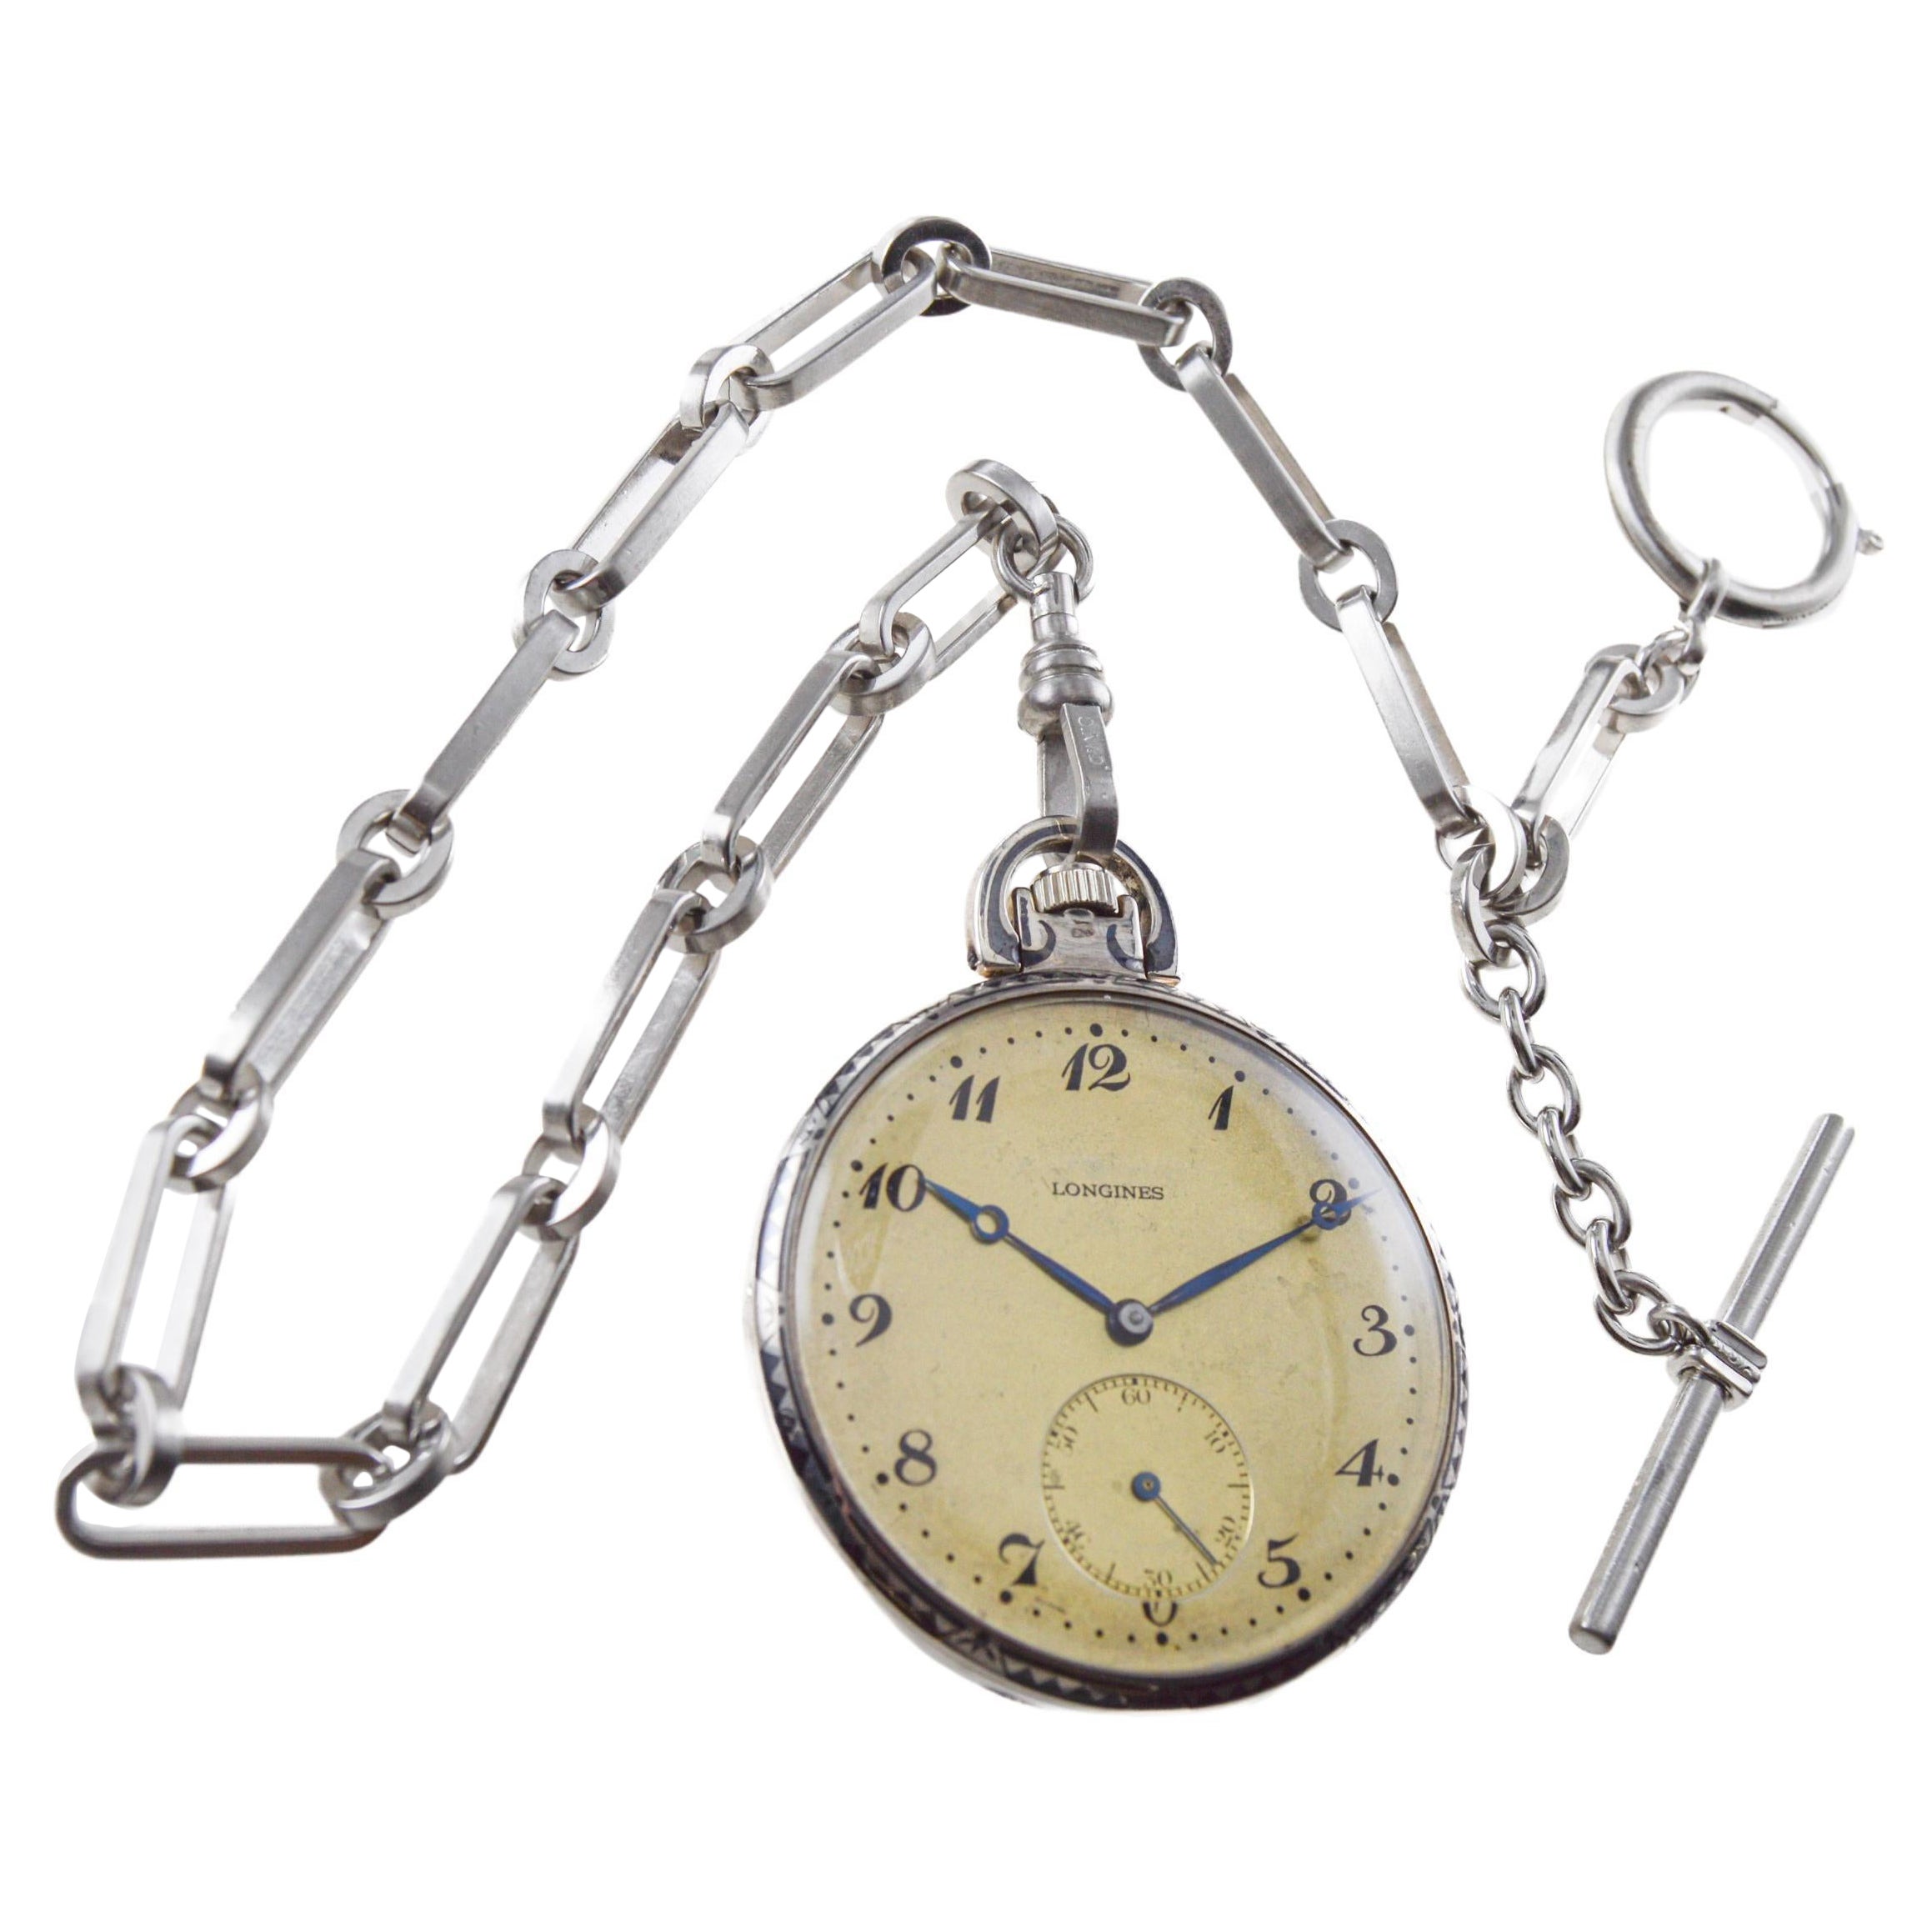 Longines Silver & Niello Watch from 1915 Dial by Stern Freres Matching Chain